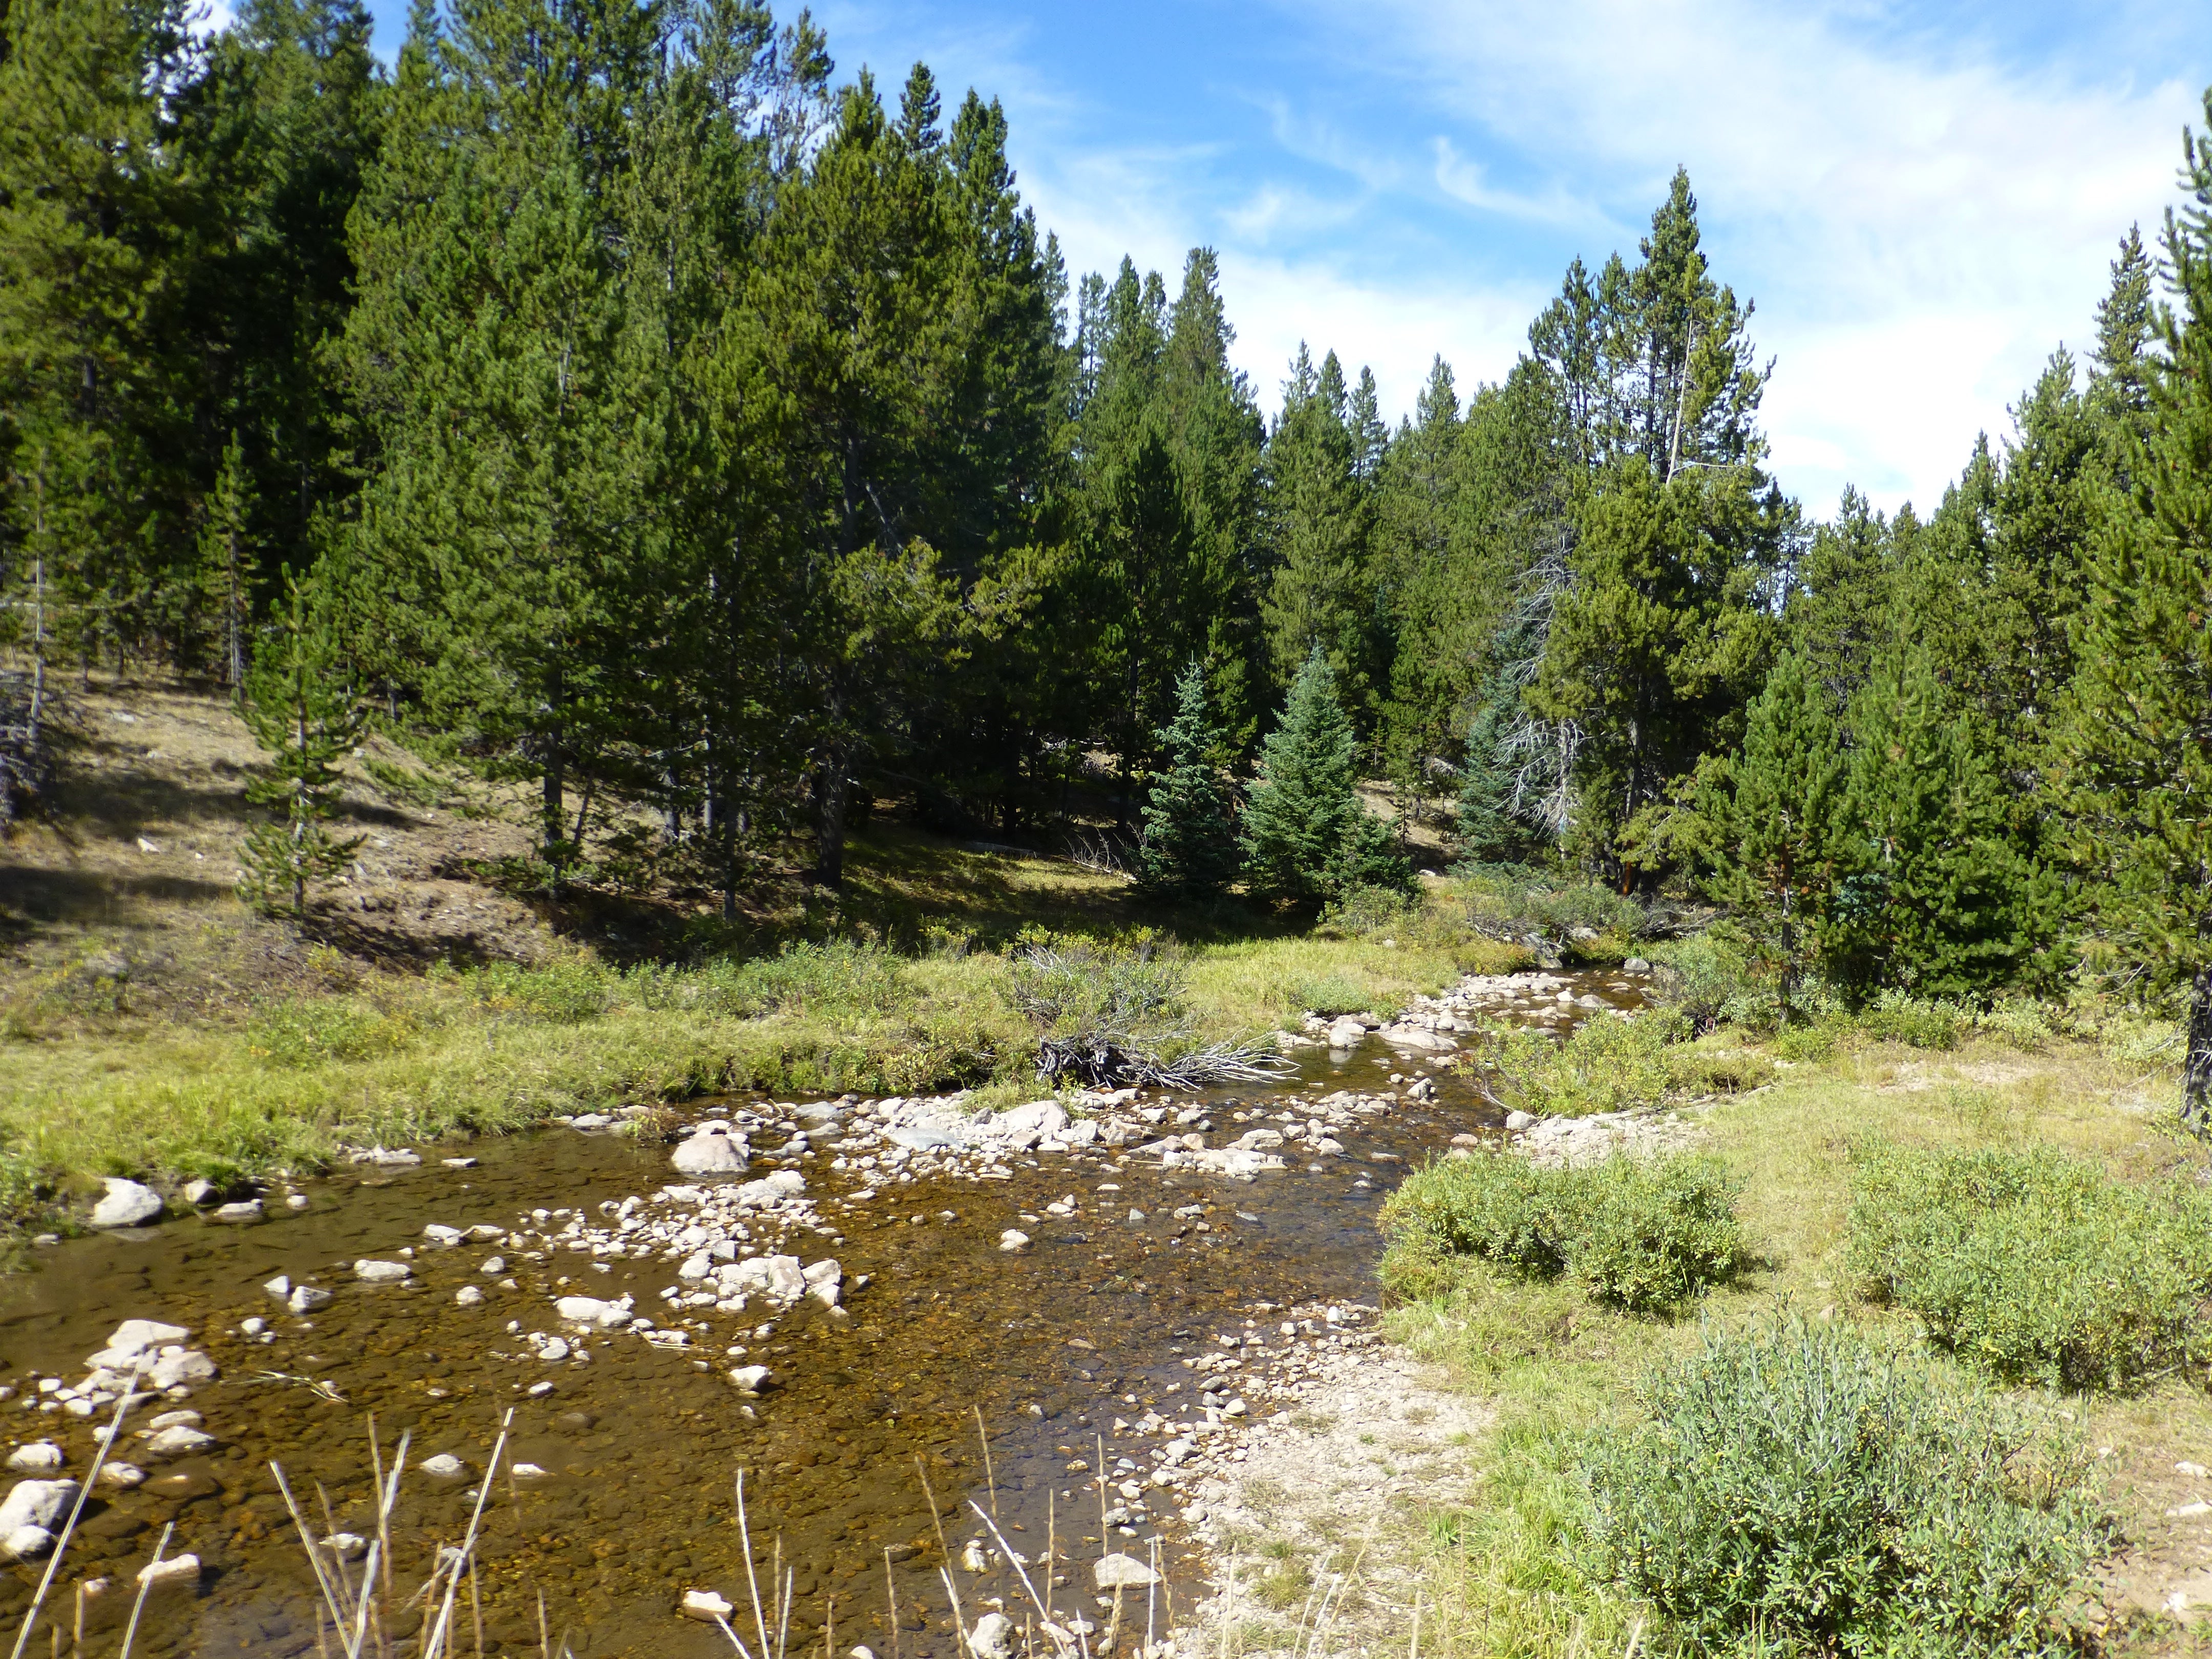 Porcupine Creek. Water levels are extremely low in September, but I did see a few fish.